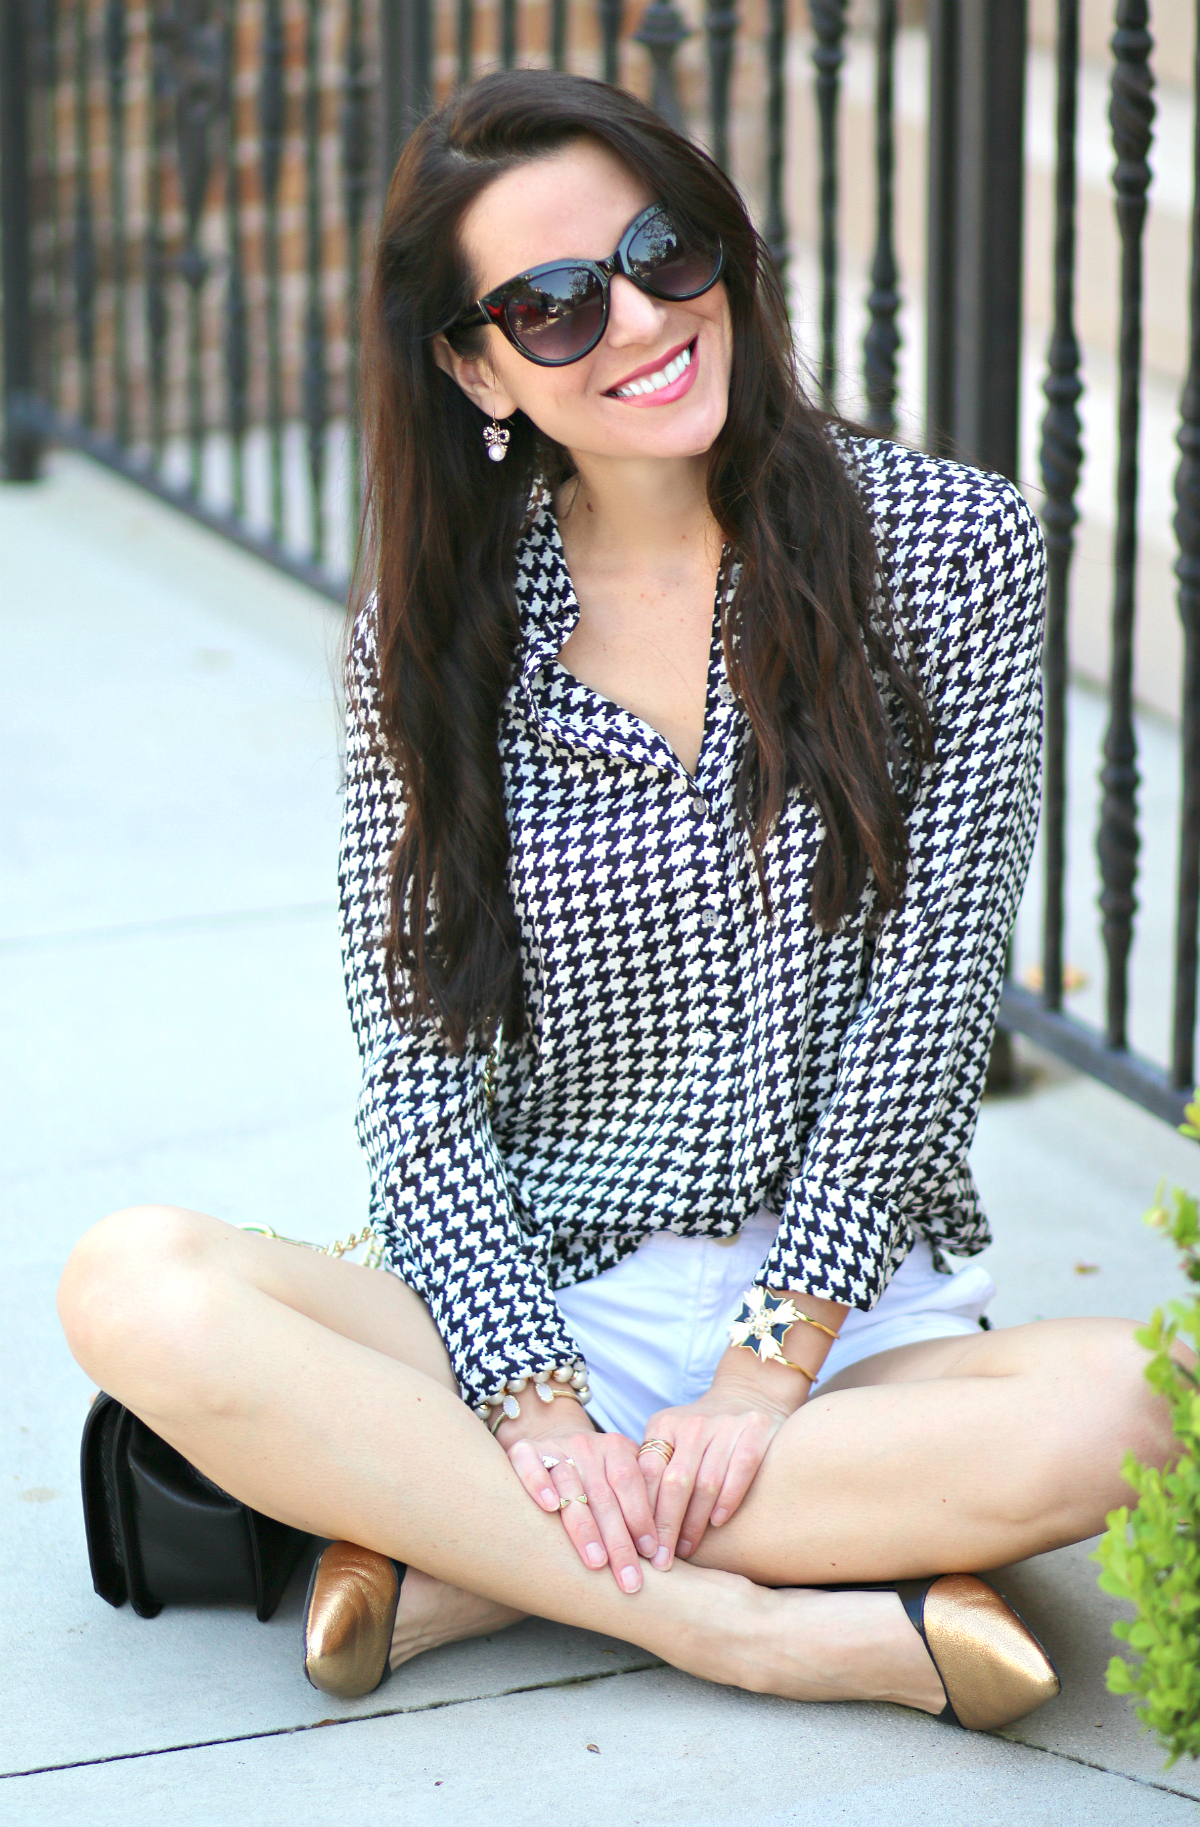 Ralph Lauren houndstooth blouse with white shorts and gold-dipped Rockport flats